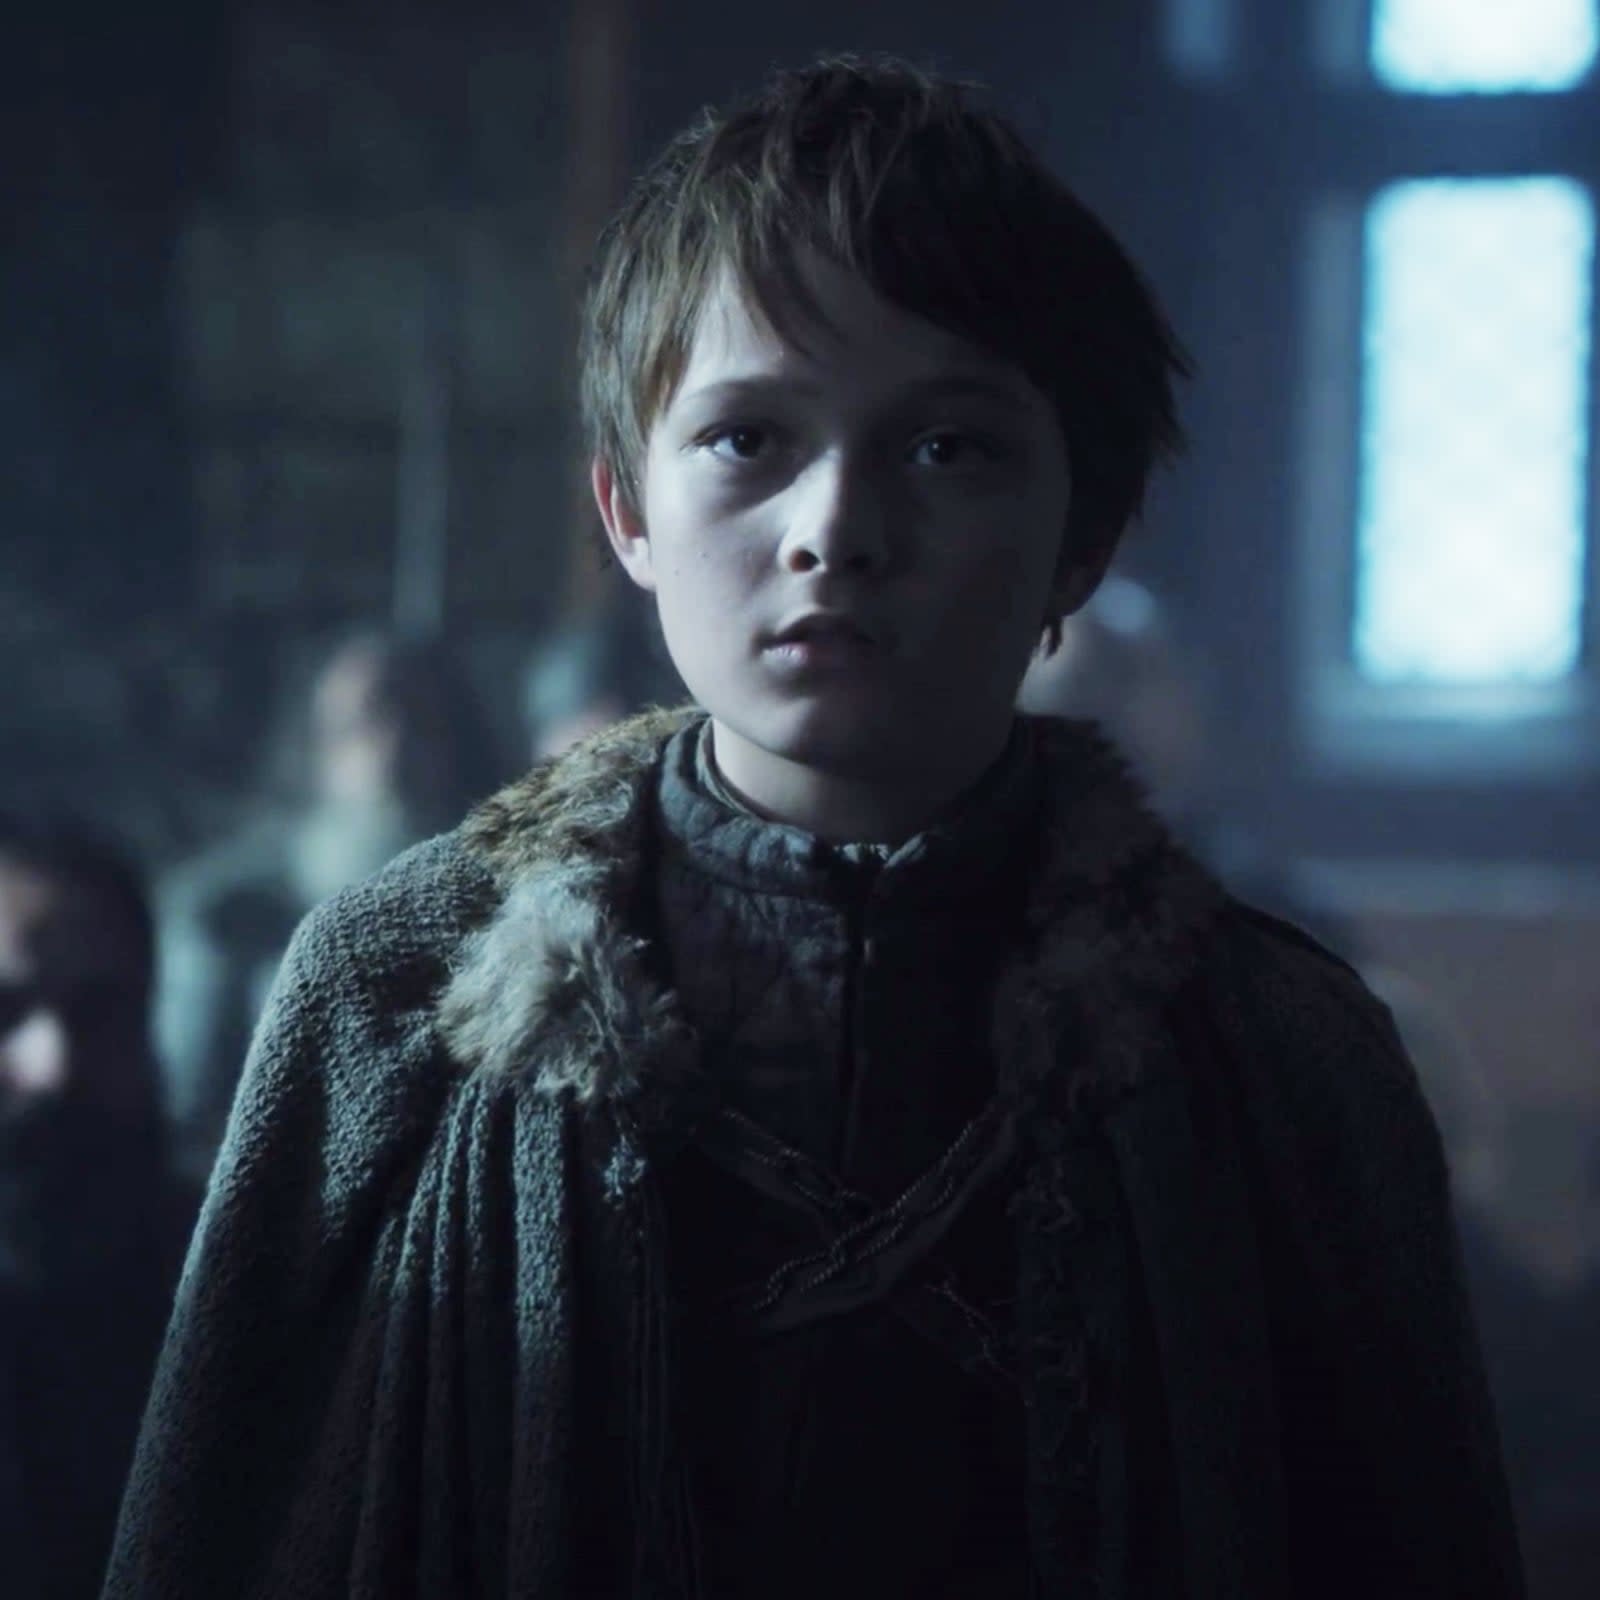 Why It Matters That This Particular Boy Meets His End On Game Of